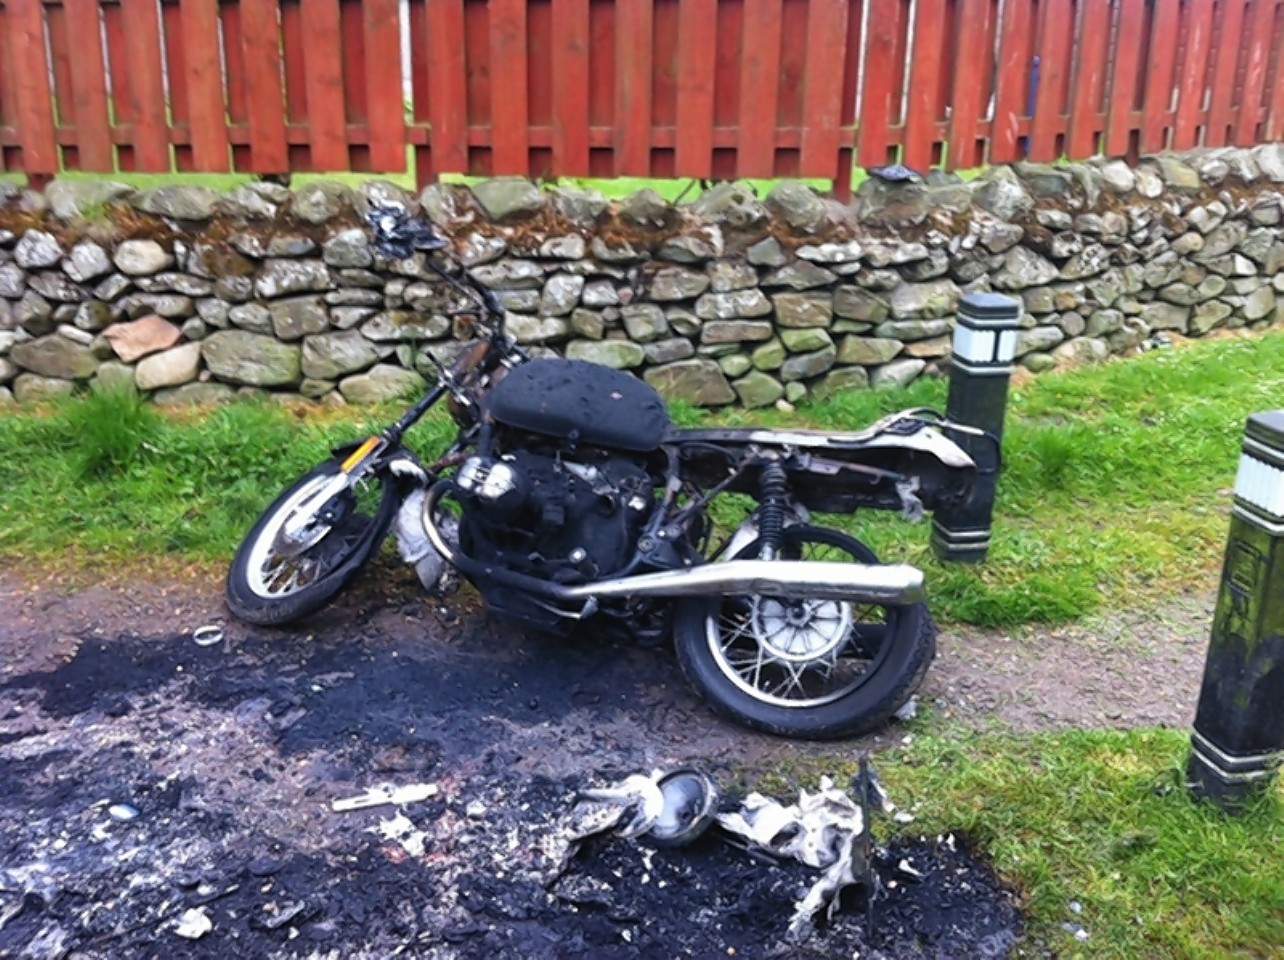 The motorbikes were left burned out on the path